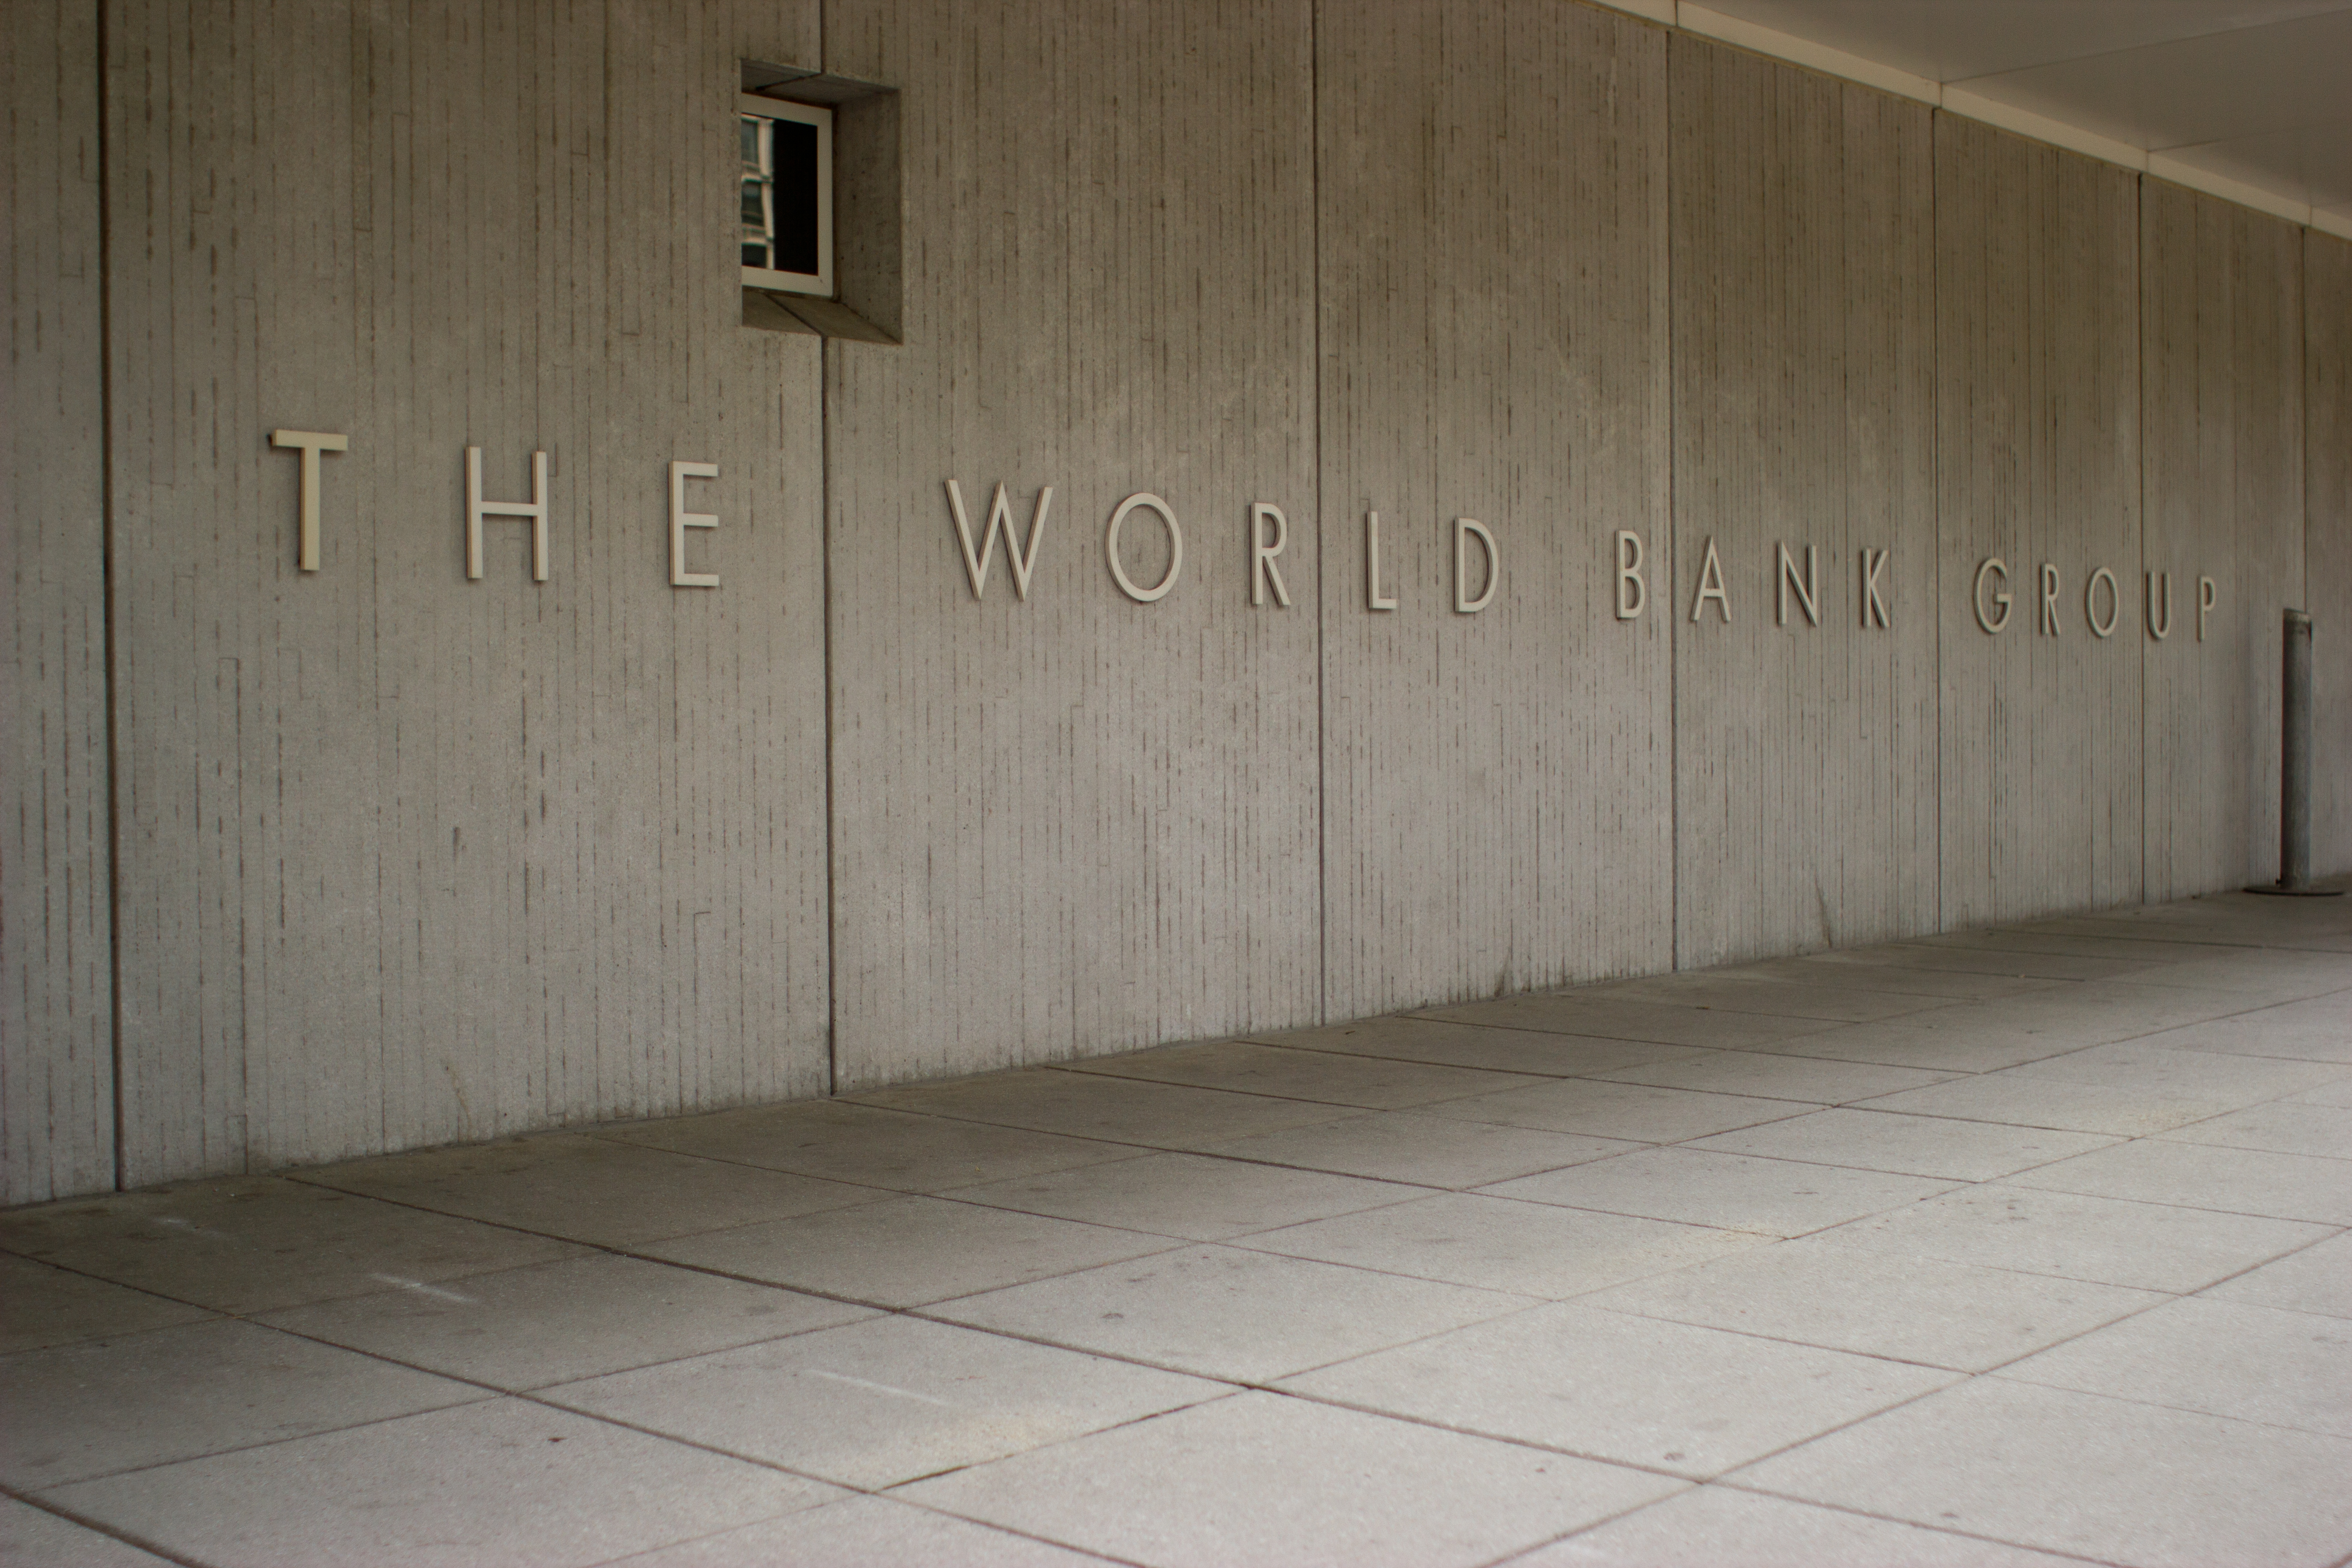 Egypt Receives First Tranche of $3 Billion World Bank Loan